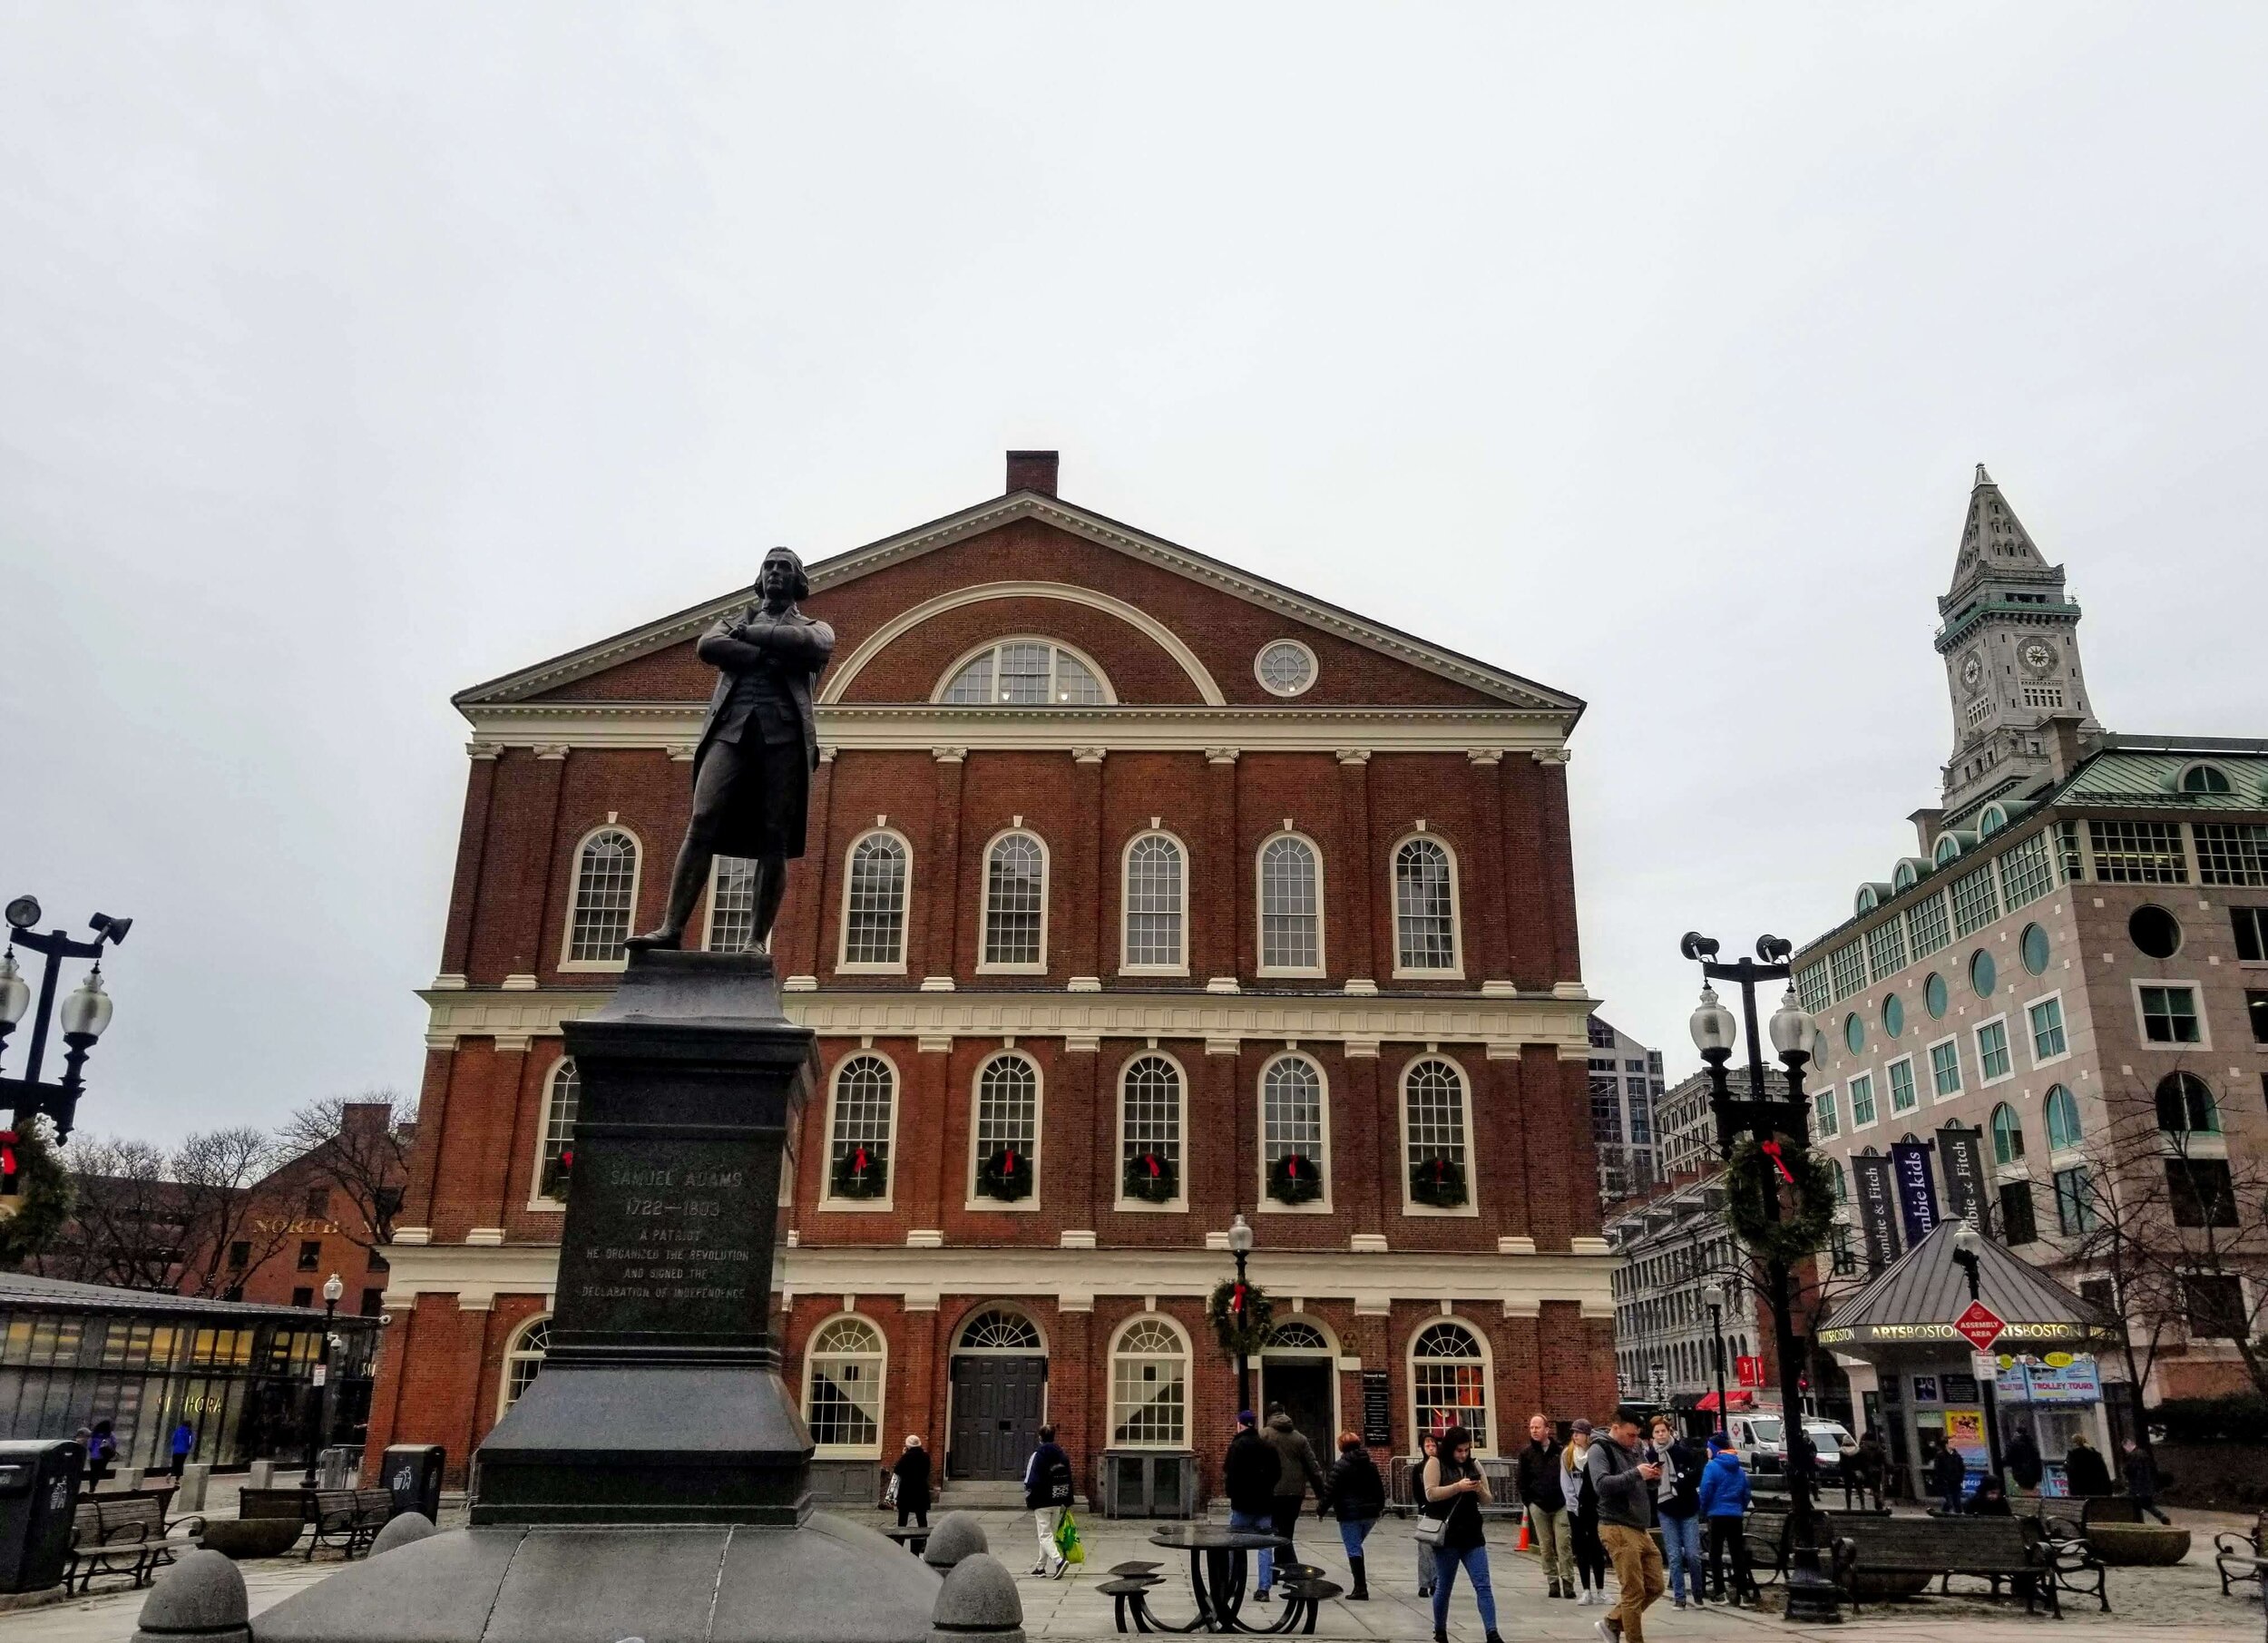  Statue of Sam Adams outside Faneuil Hall 